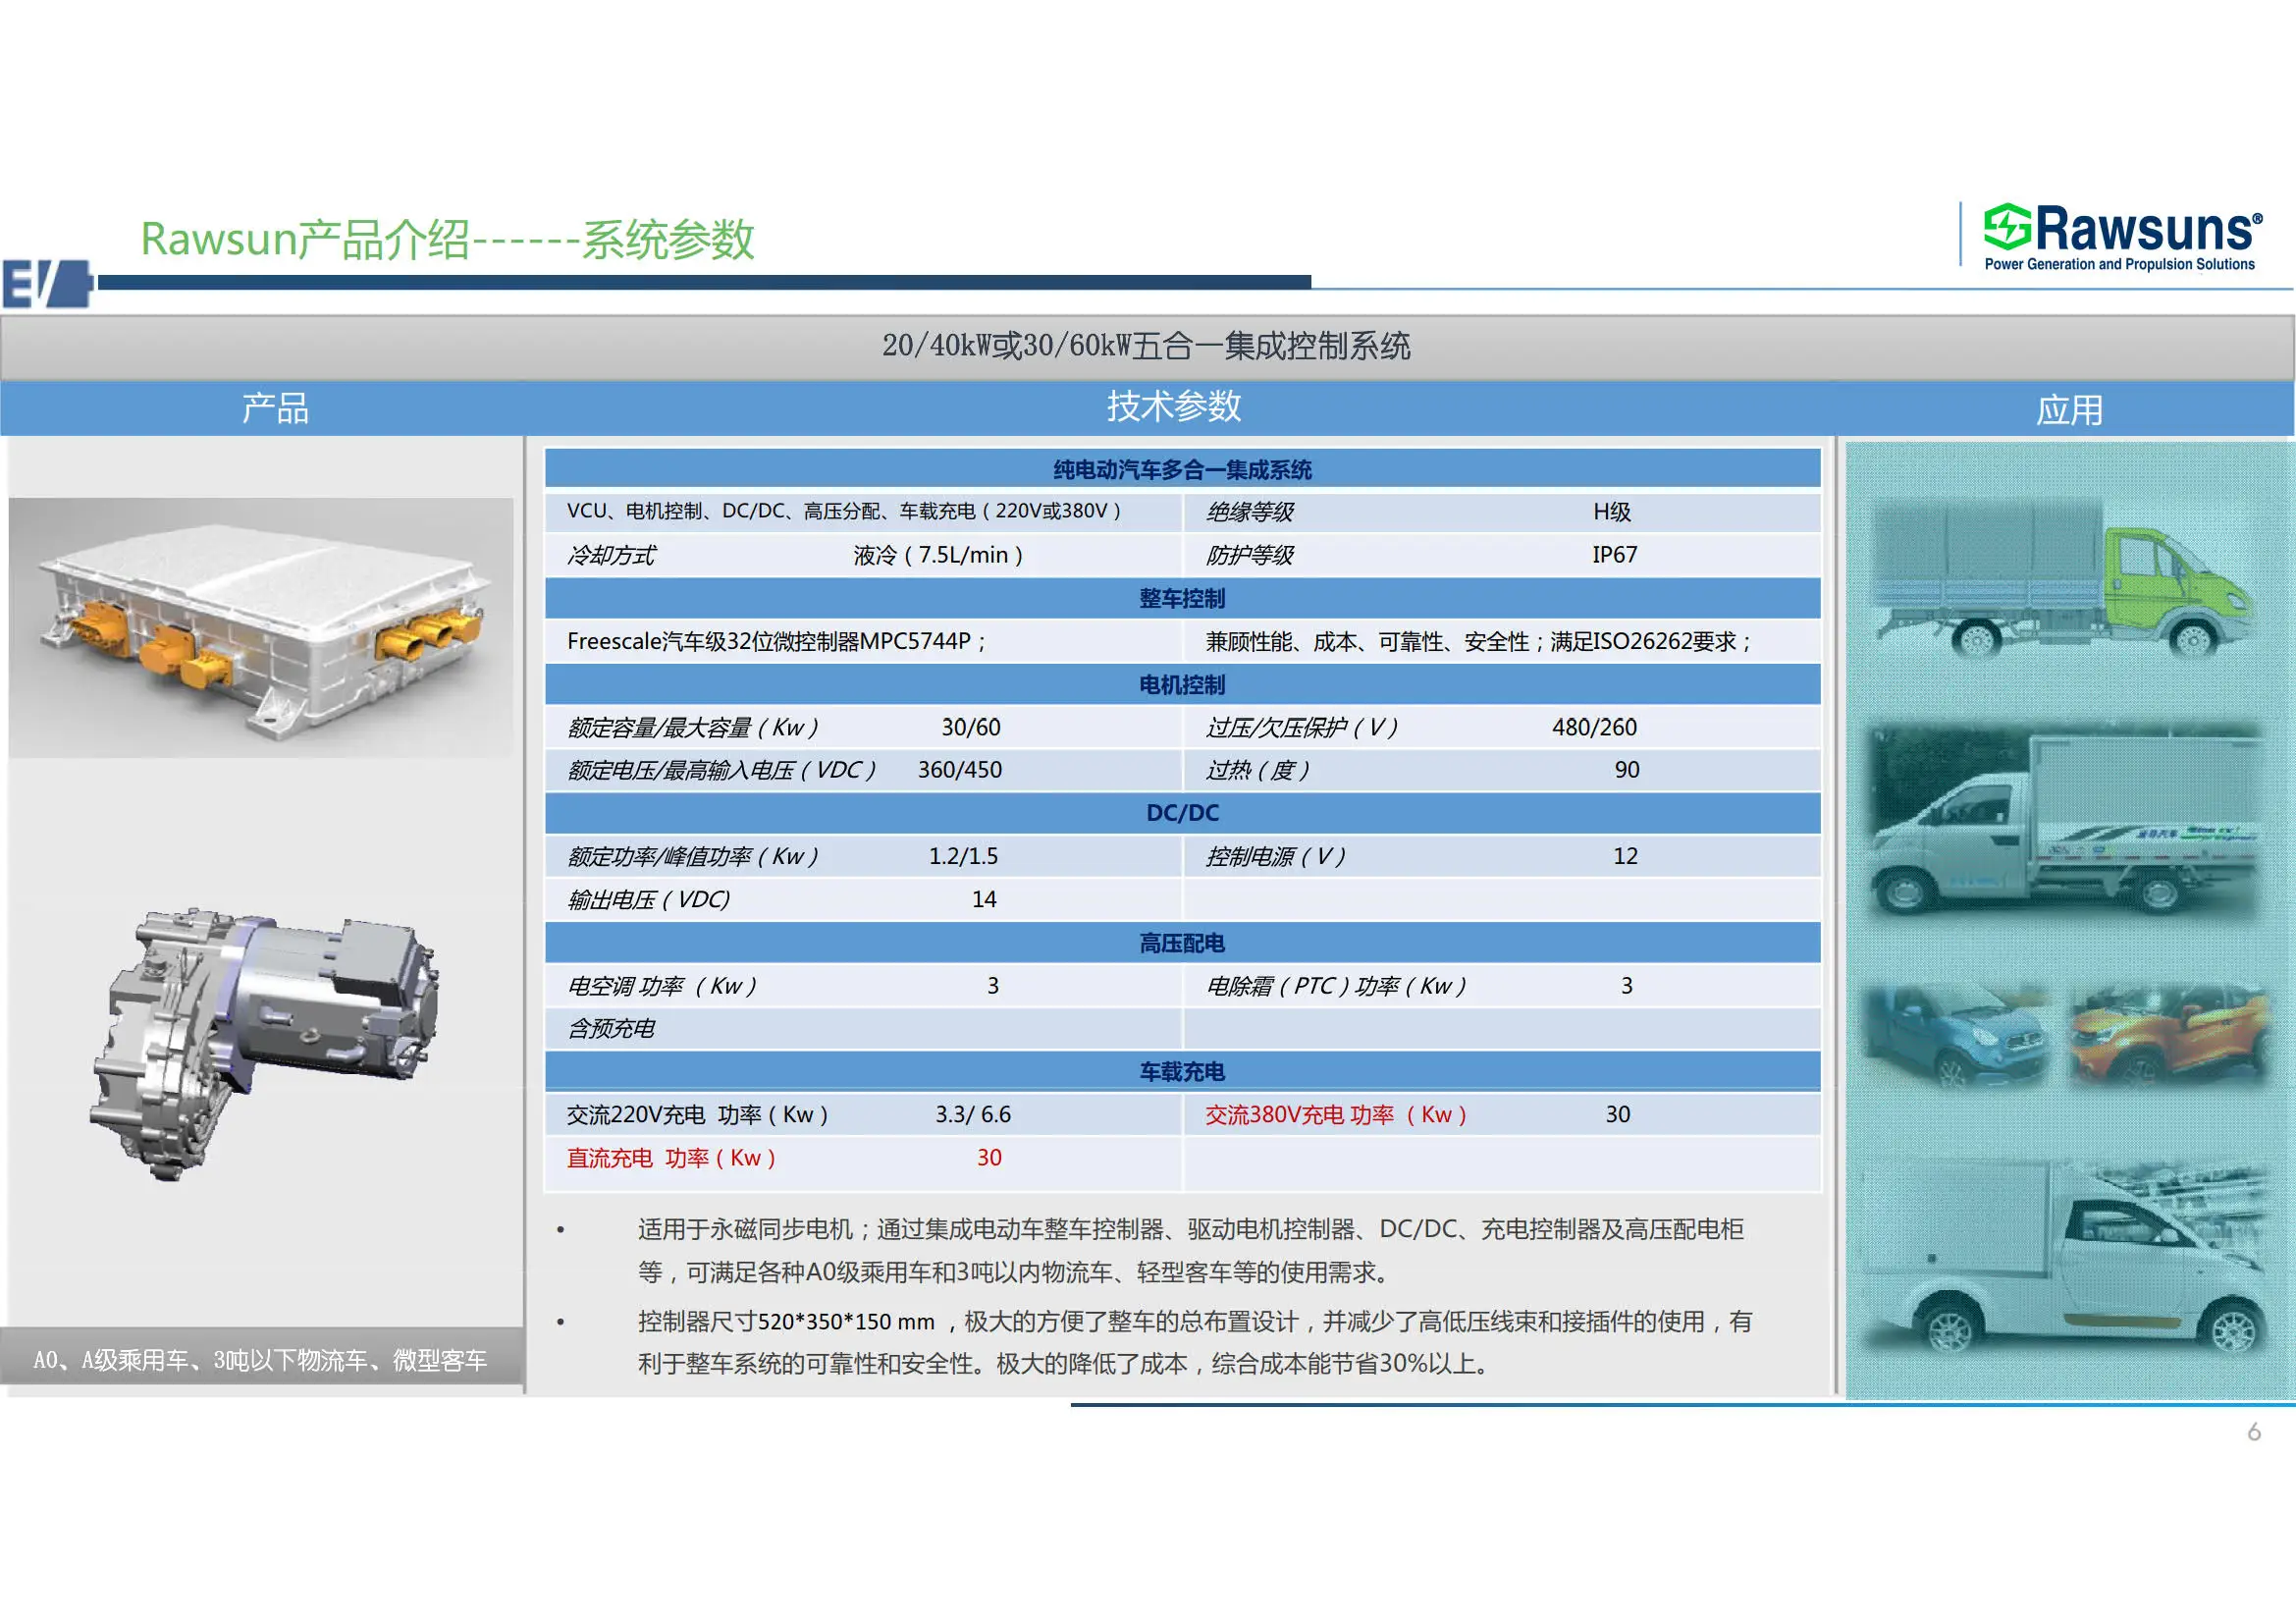 Integrated Ev Controller 5 In 1 For 55kw/130kw Electric Vehicle